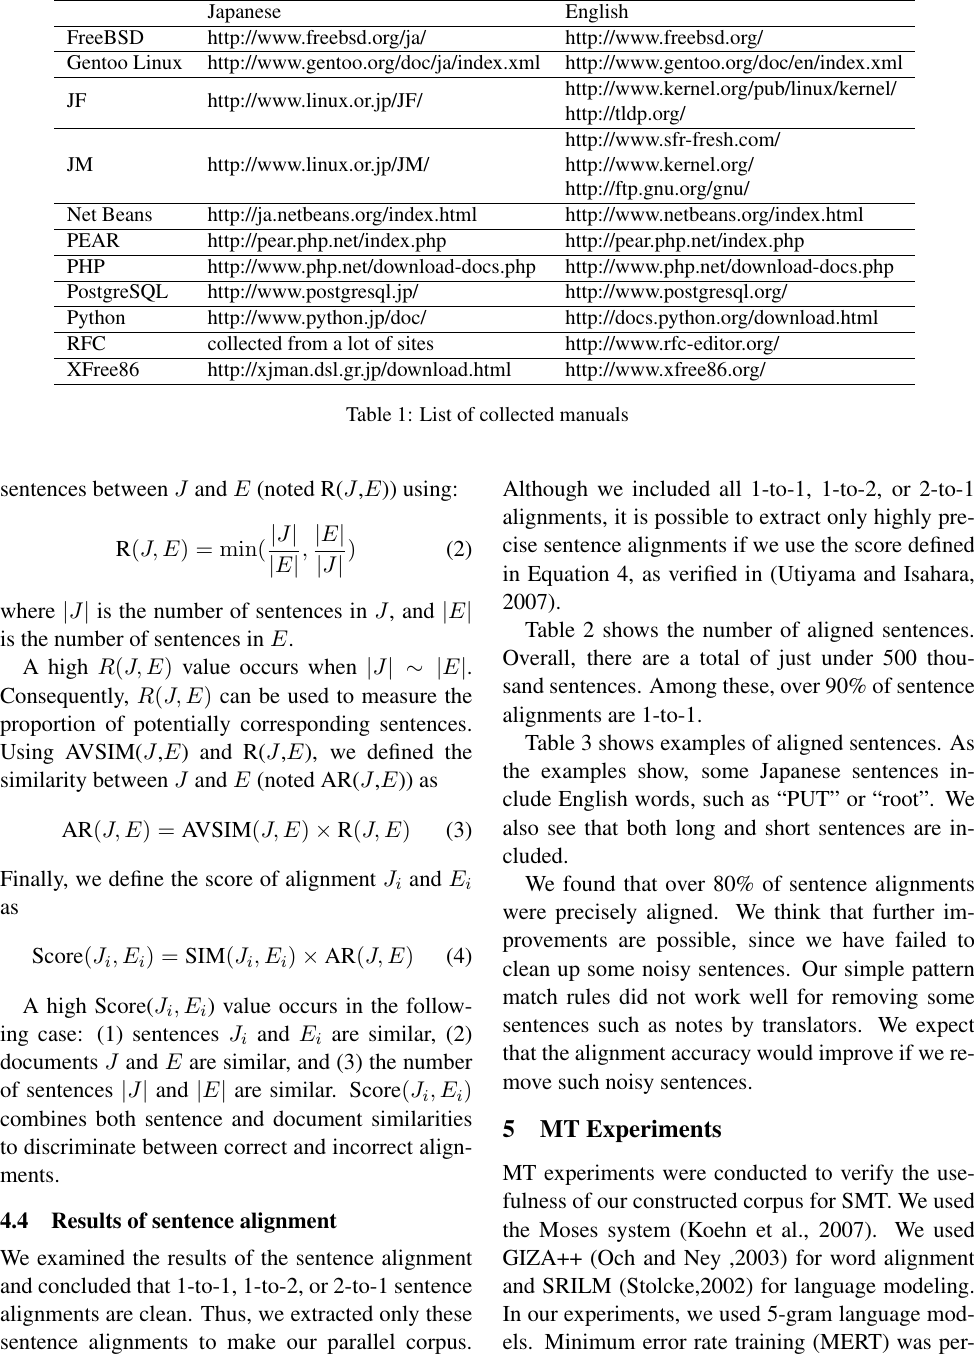 Page 4 of 6 - Development Of A Japanese-English Software Manual Parallel Corpus